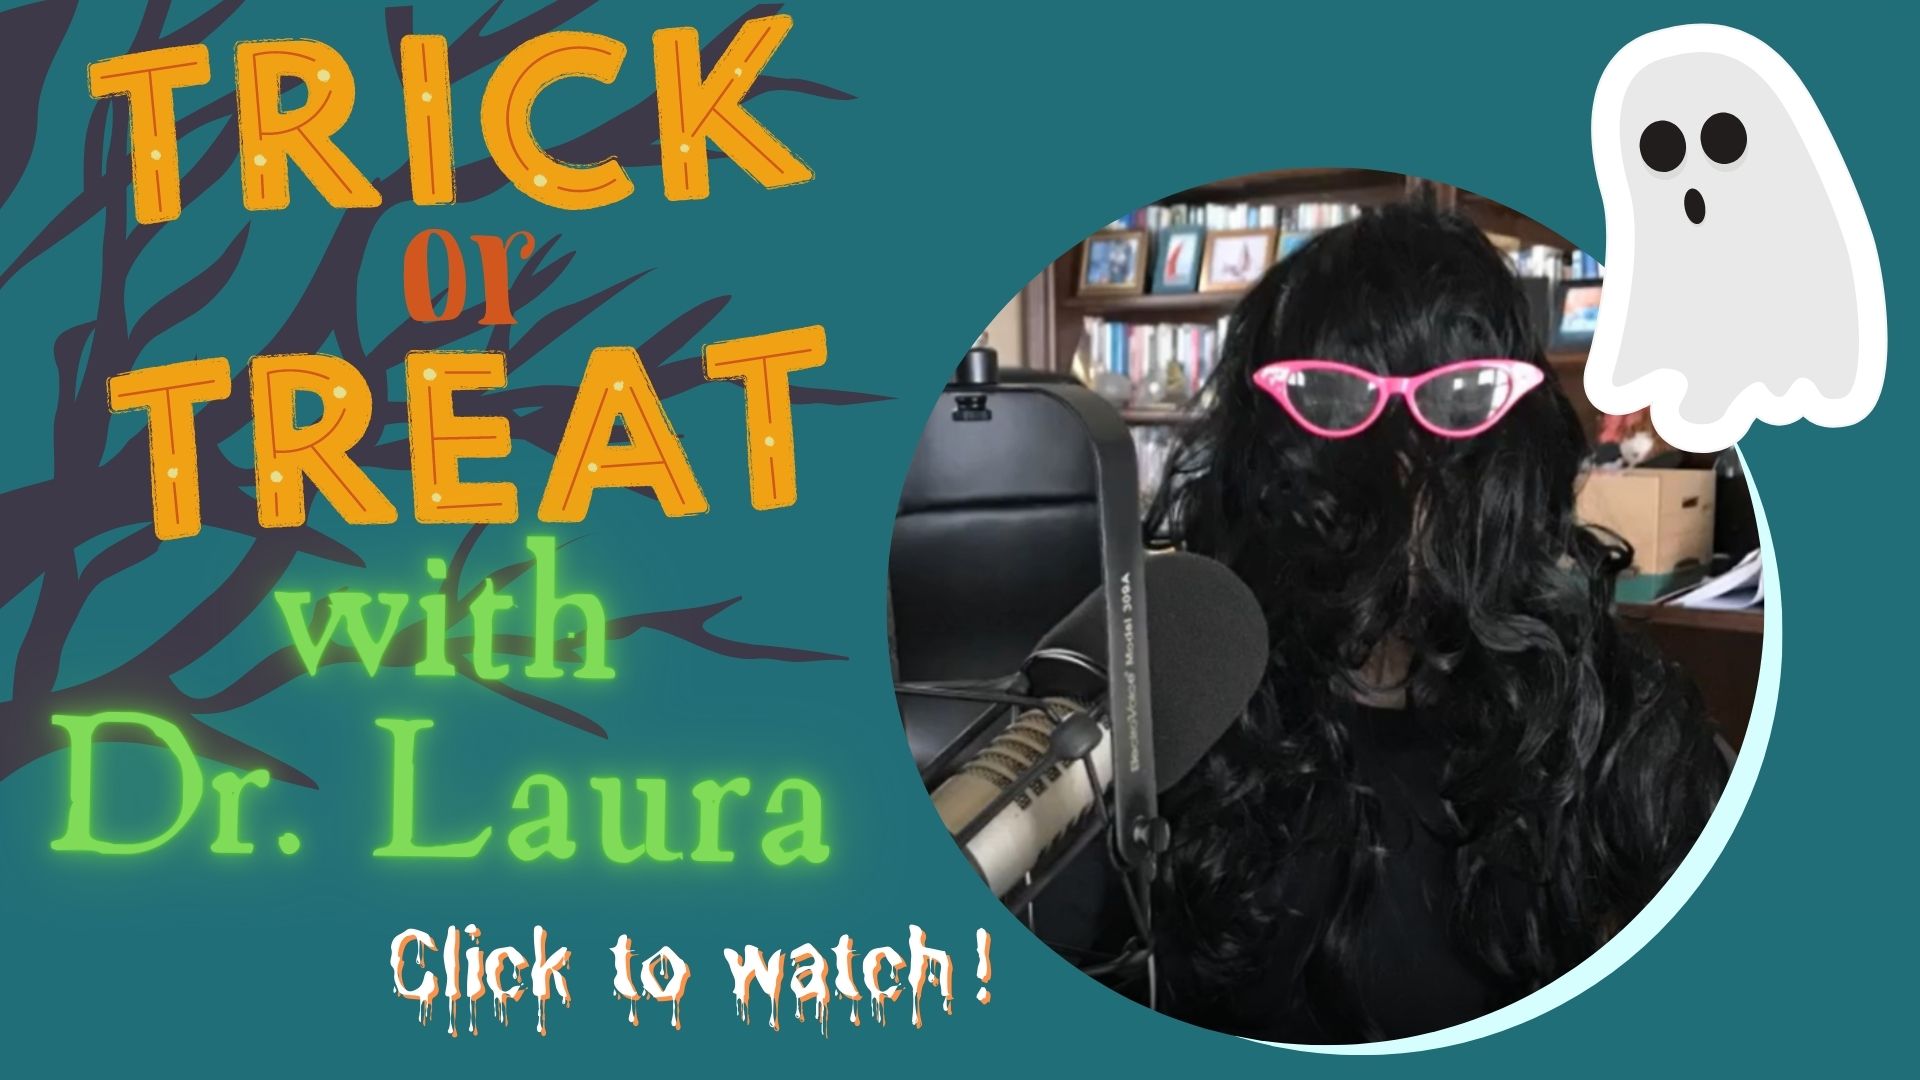 YouTube: Trick or Treat with Dr. Laura